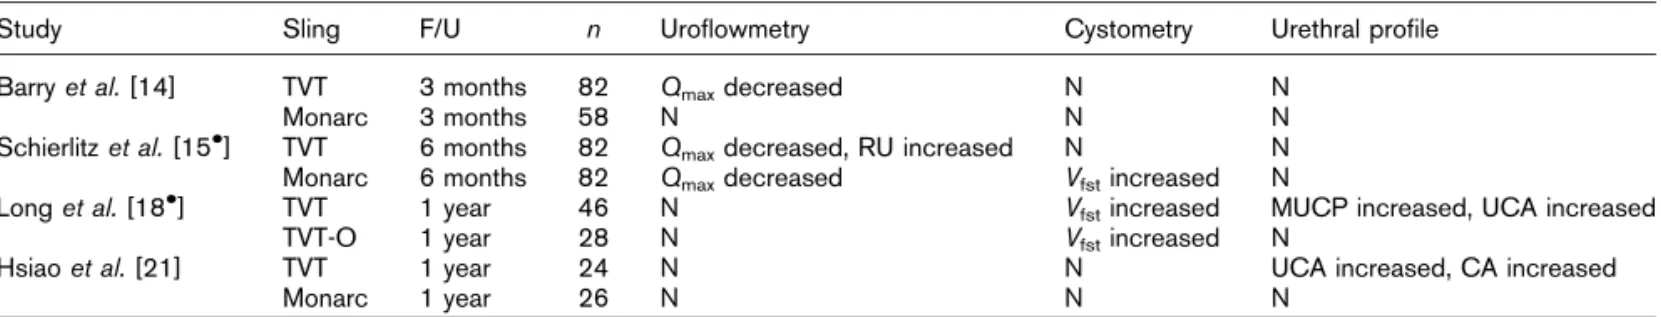 Table 1 shows randomized and nonrandomized studies presenting the urodynamic changes following TVT and TOT